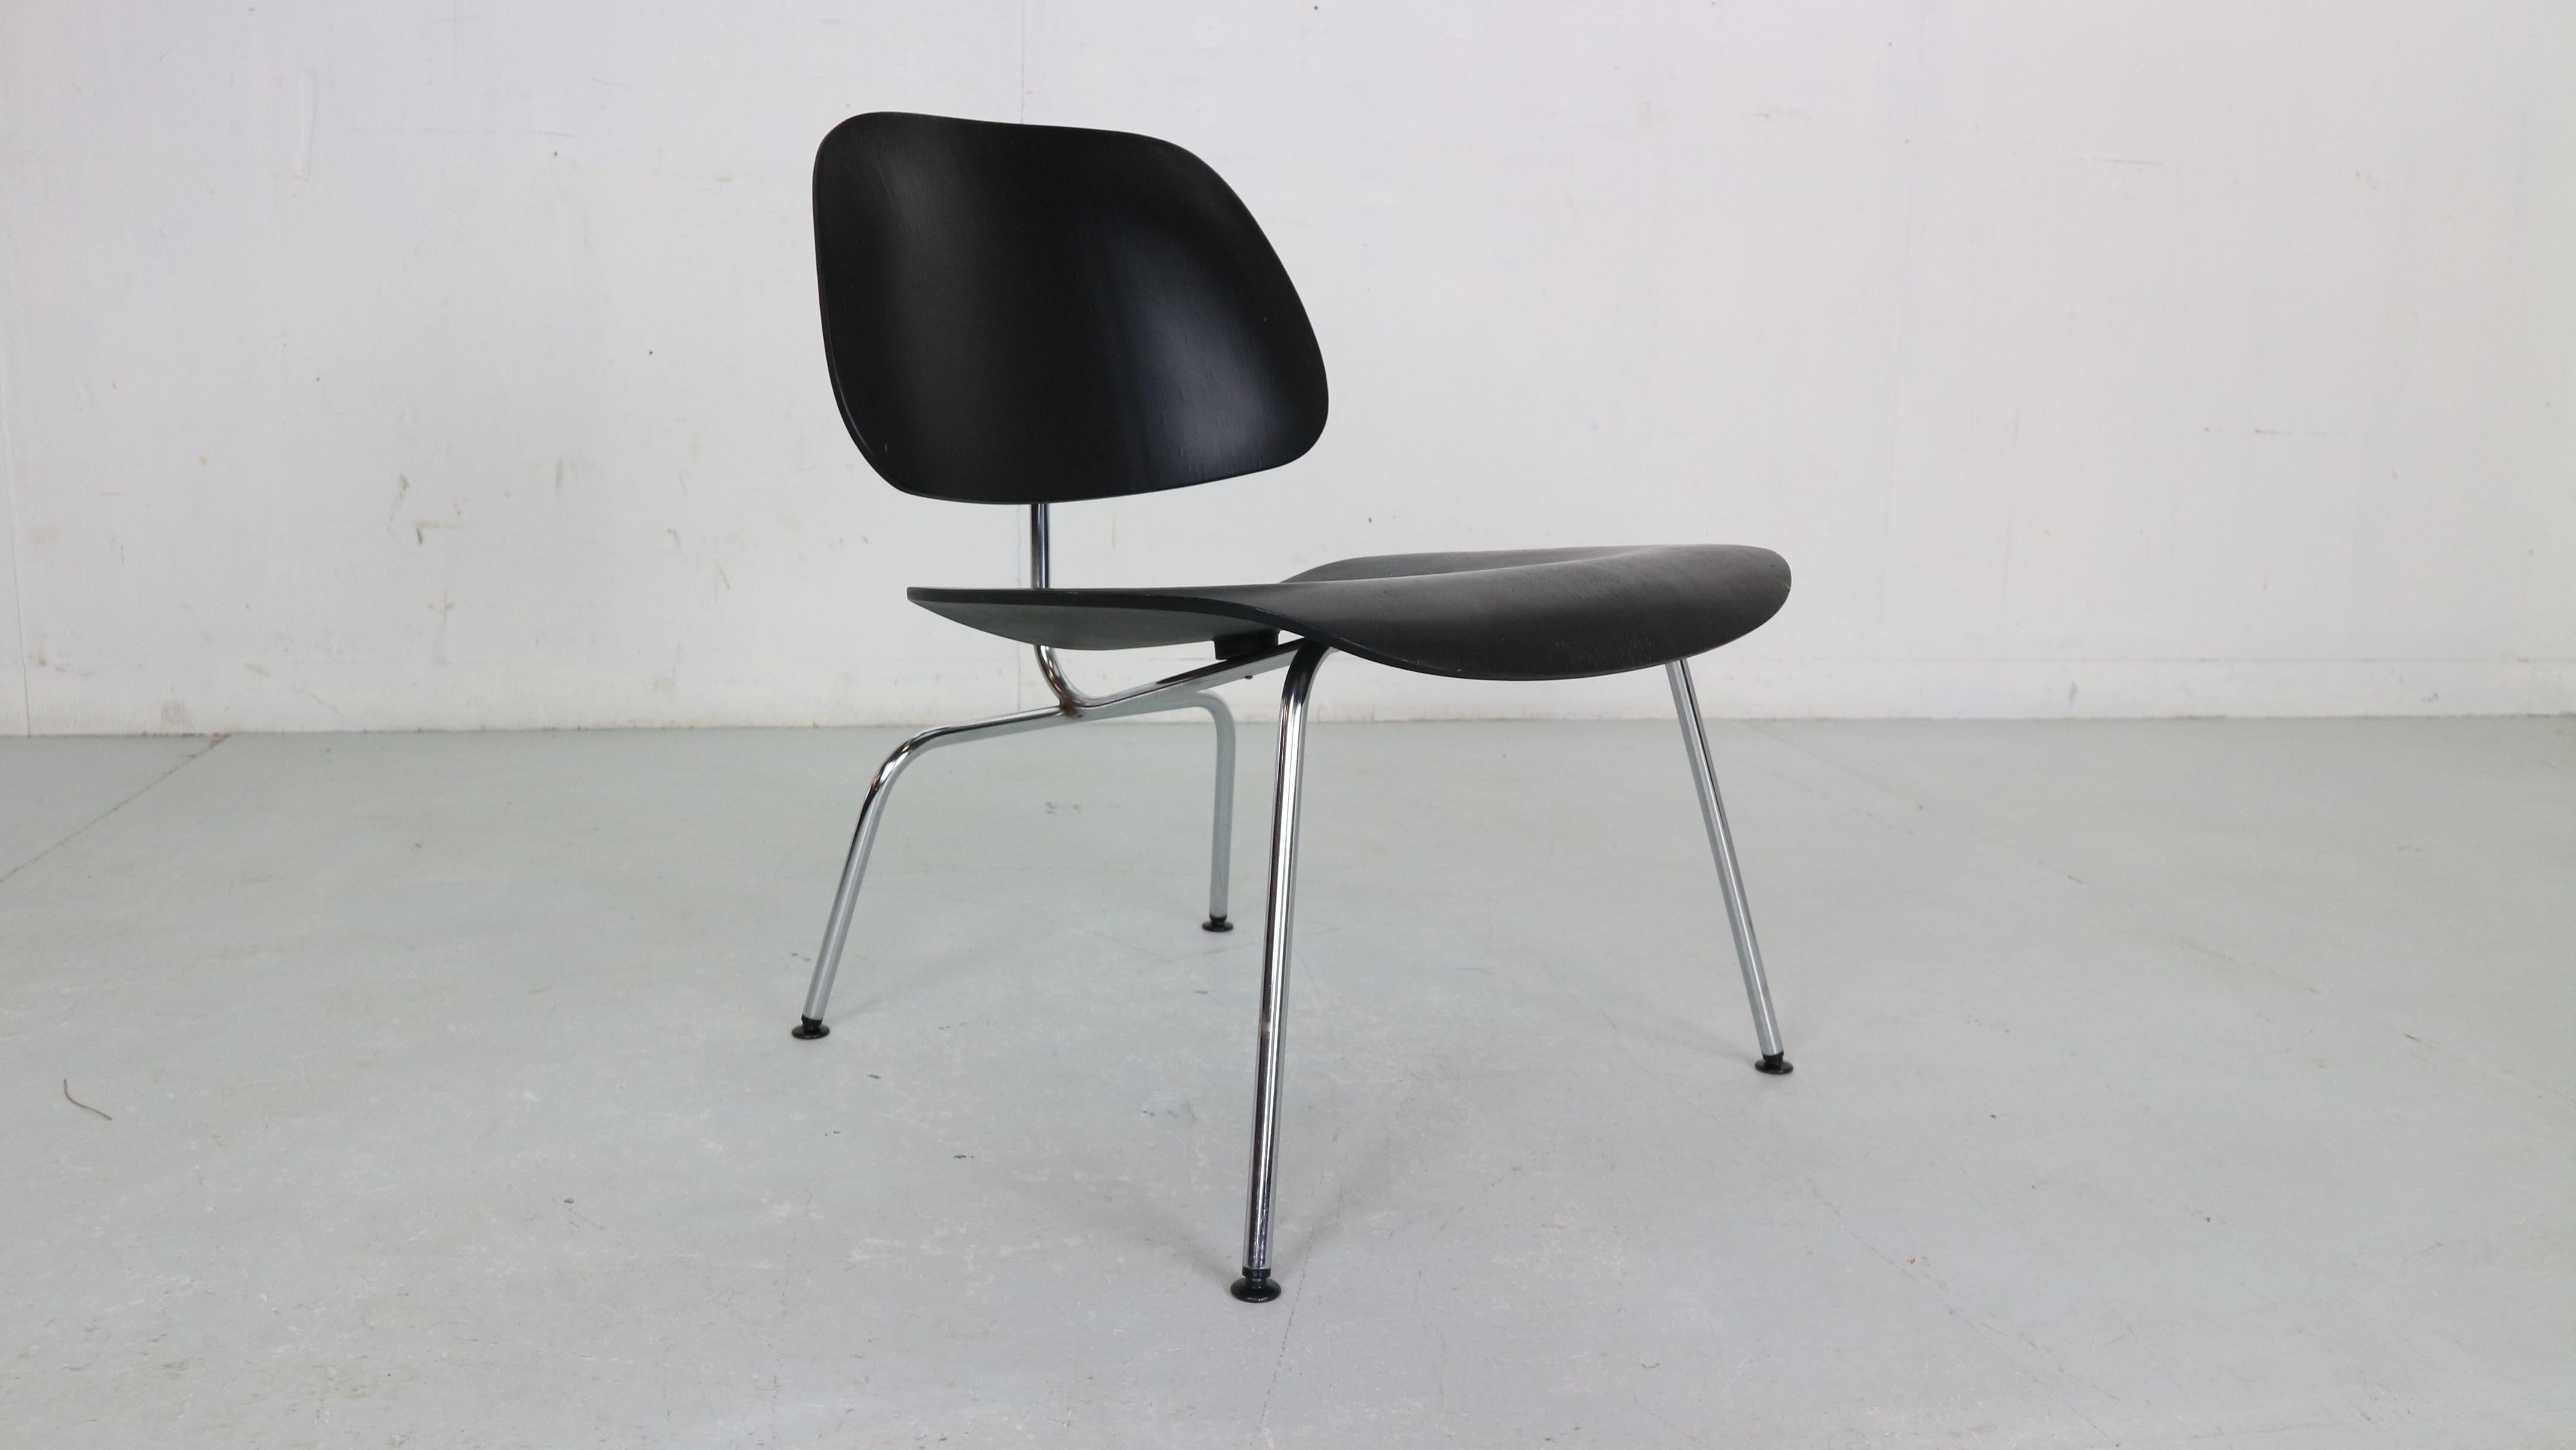 Early production original lounge chair designed by Charles and Ray Eames for Heman Miller, 1950s

The 'LCM